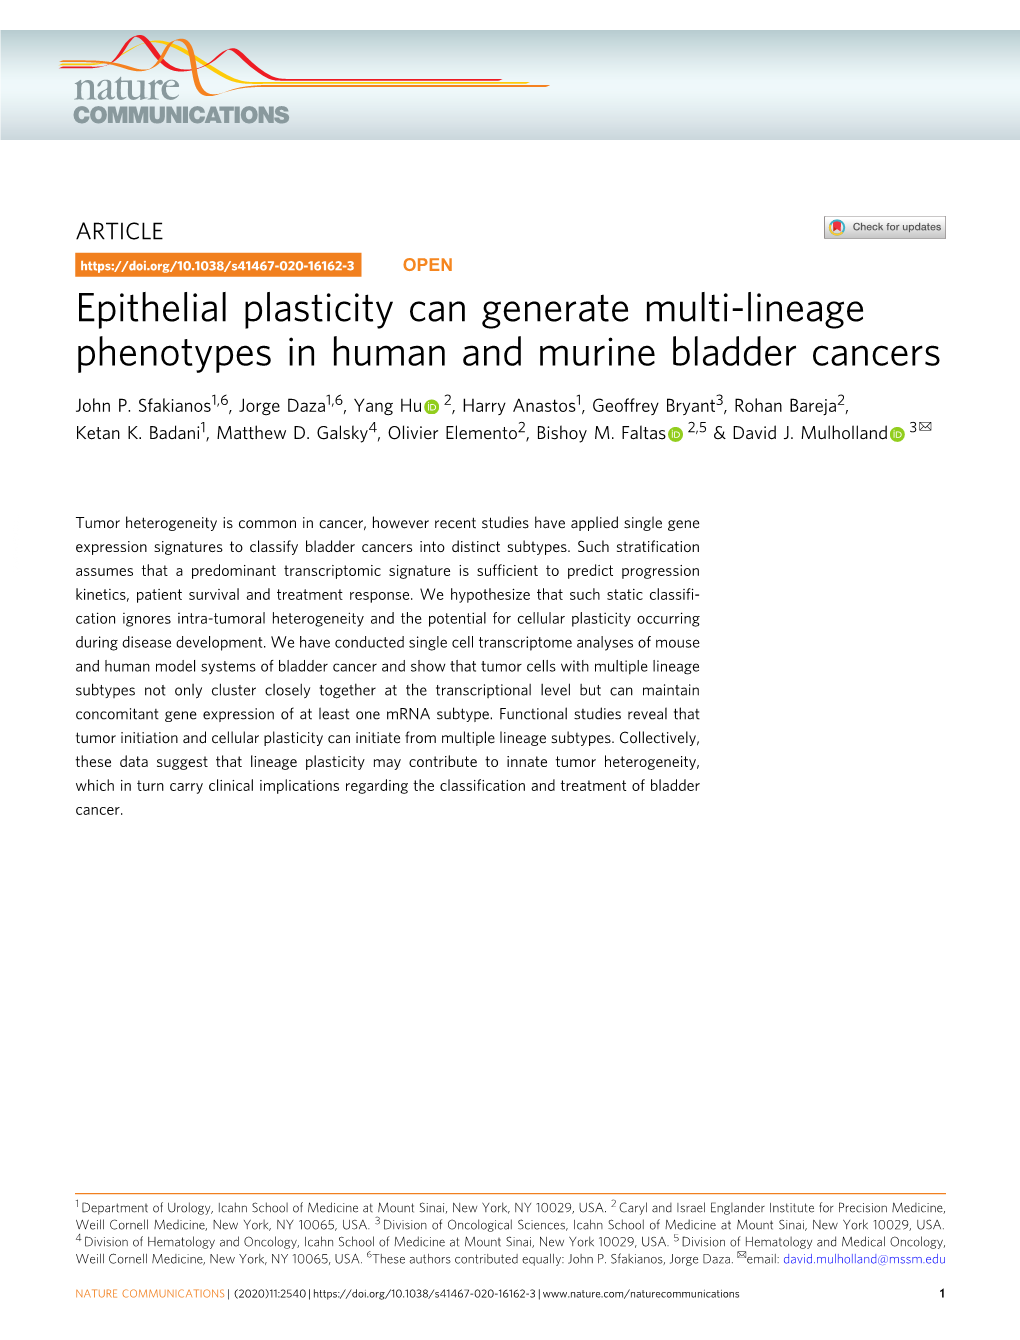 Epithelial Plasticity Can Generate Multi-Lineage Phenotypes in Human and Murine Bladder Cancers